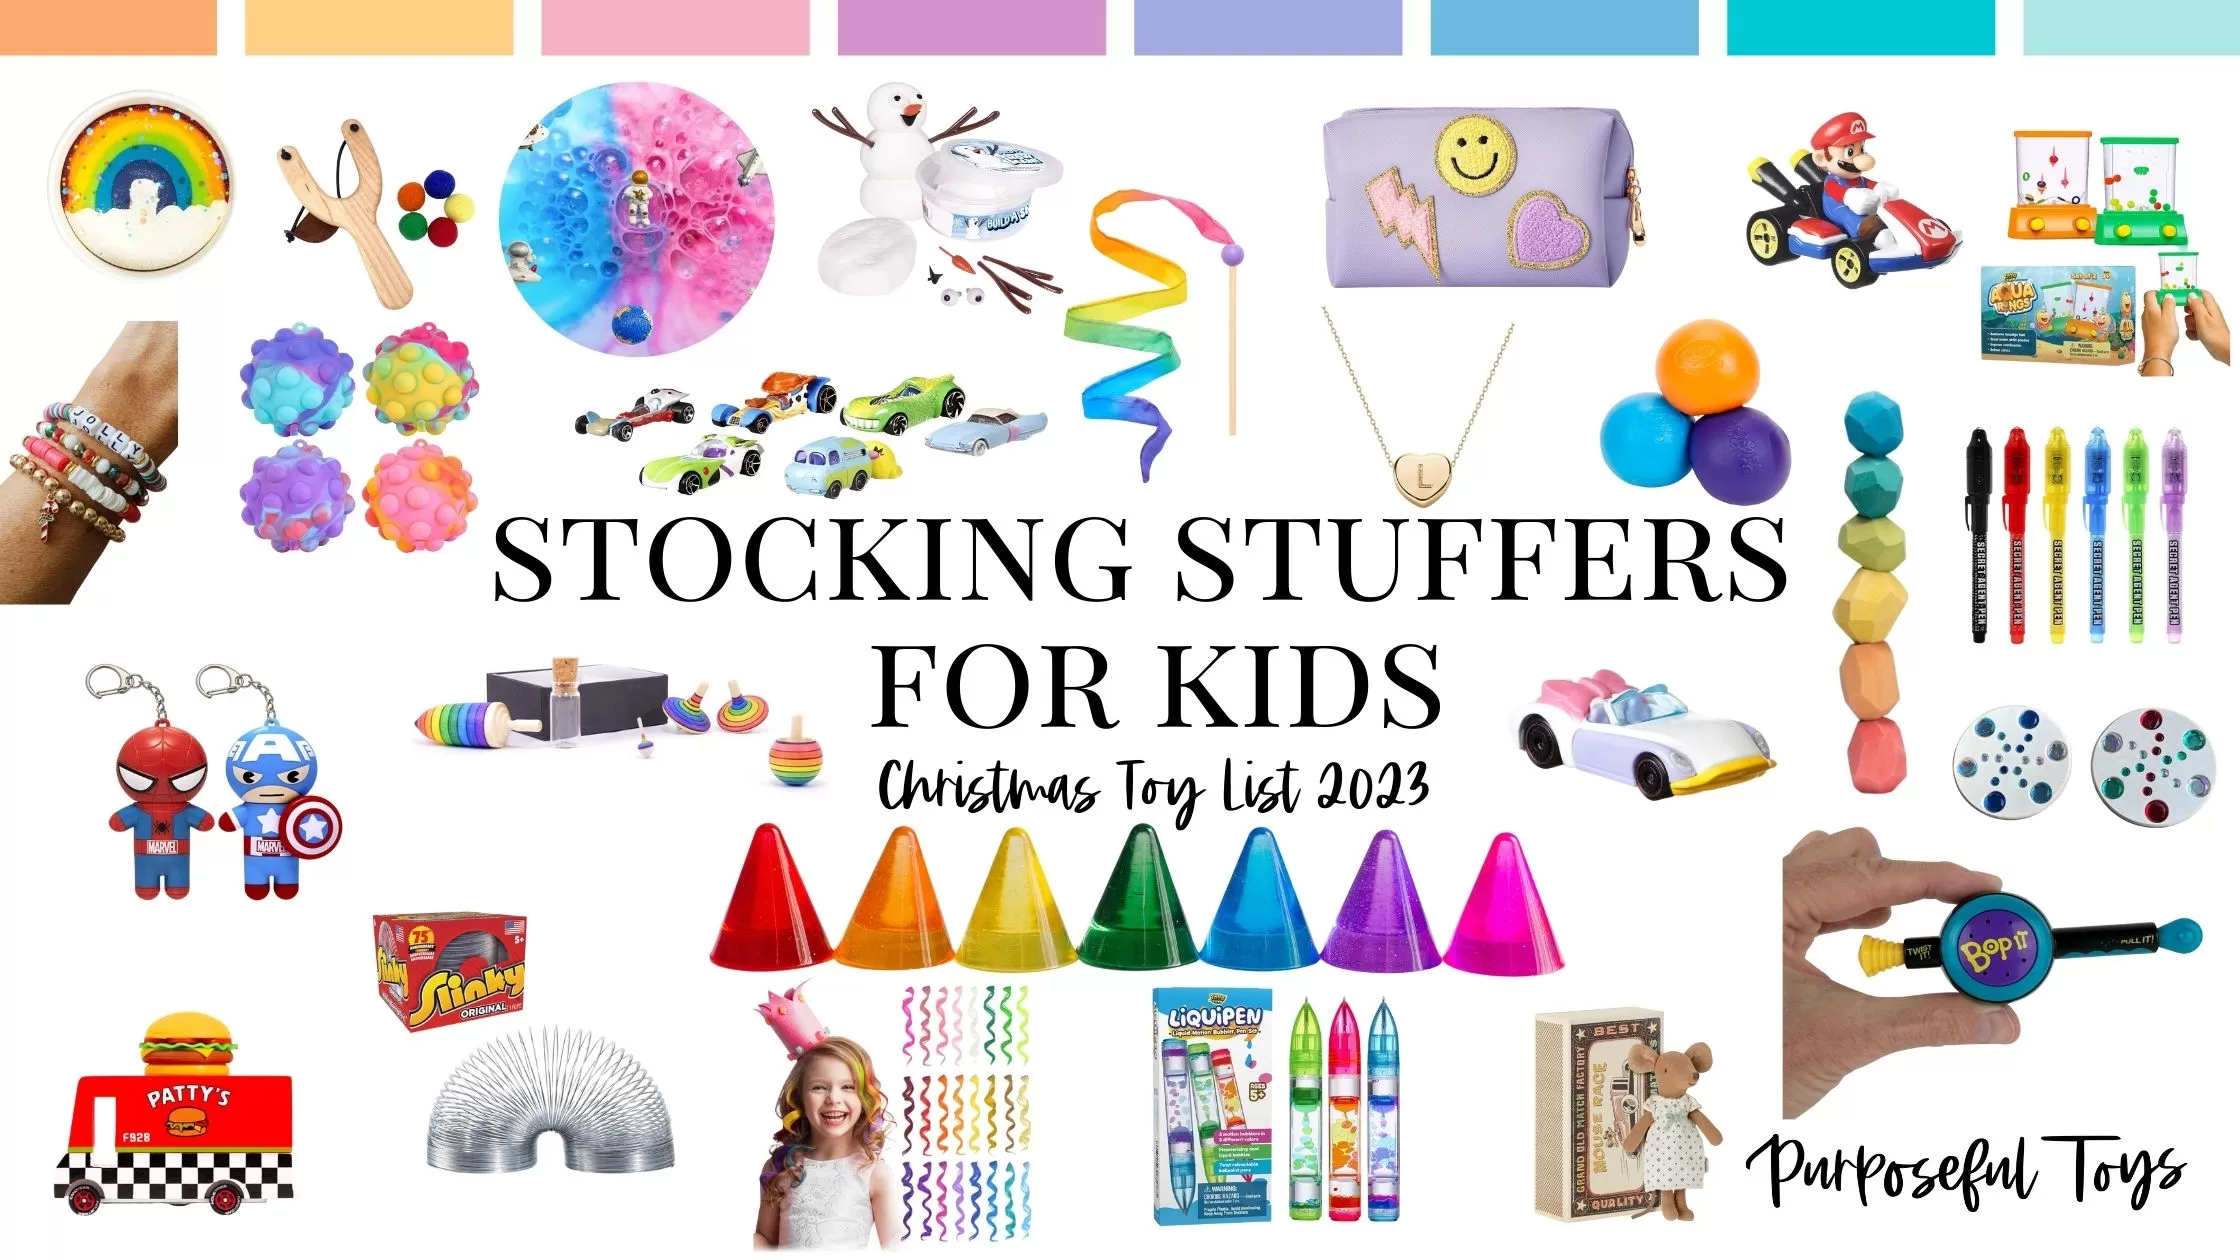 60+ of the best stocking stuffer ideas for adults and kids in 2023